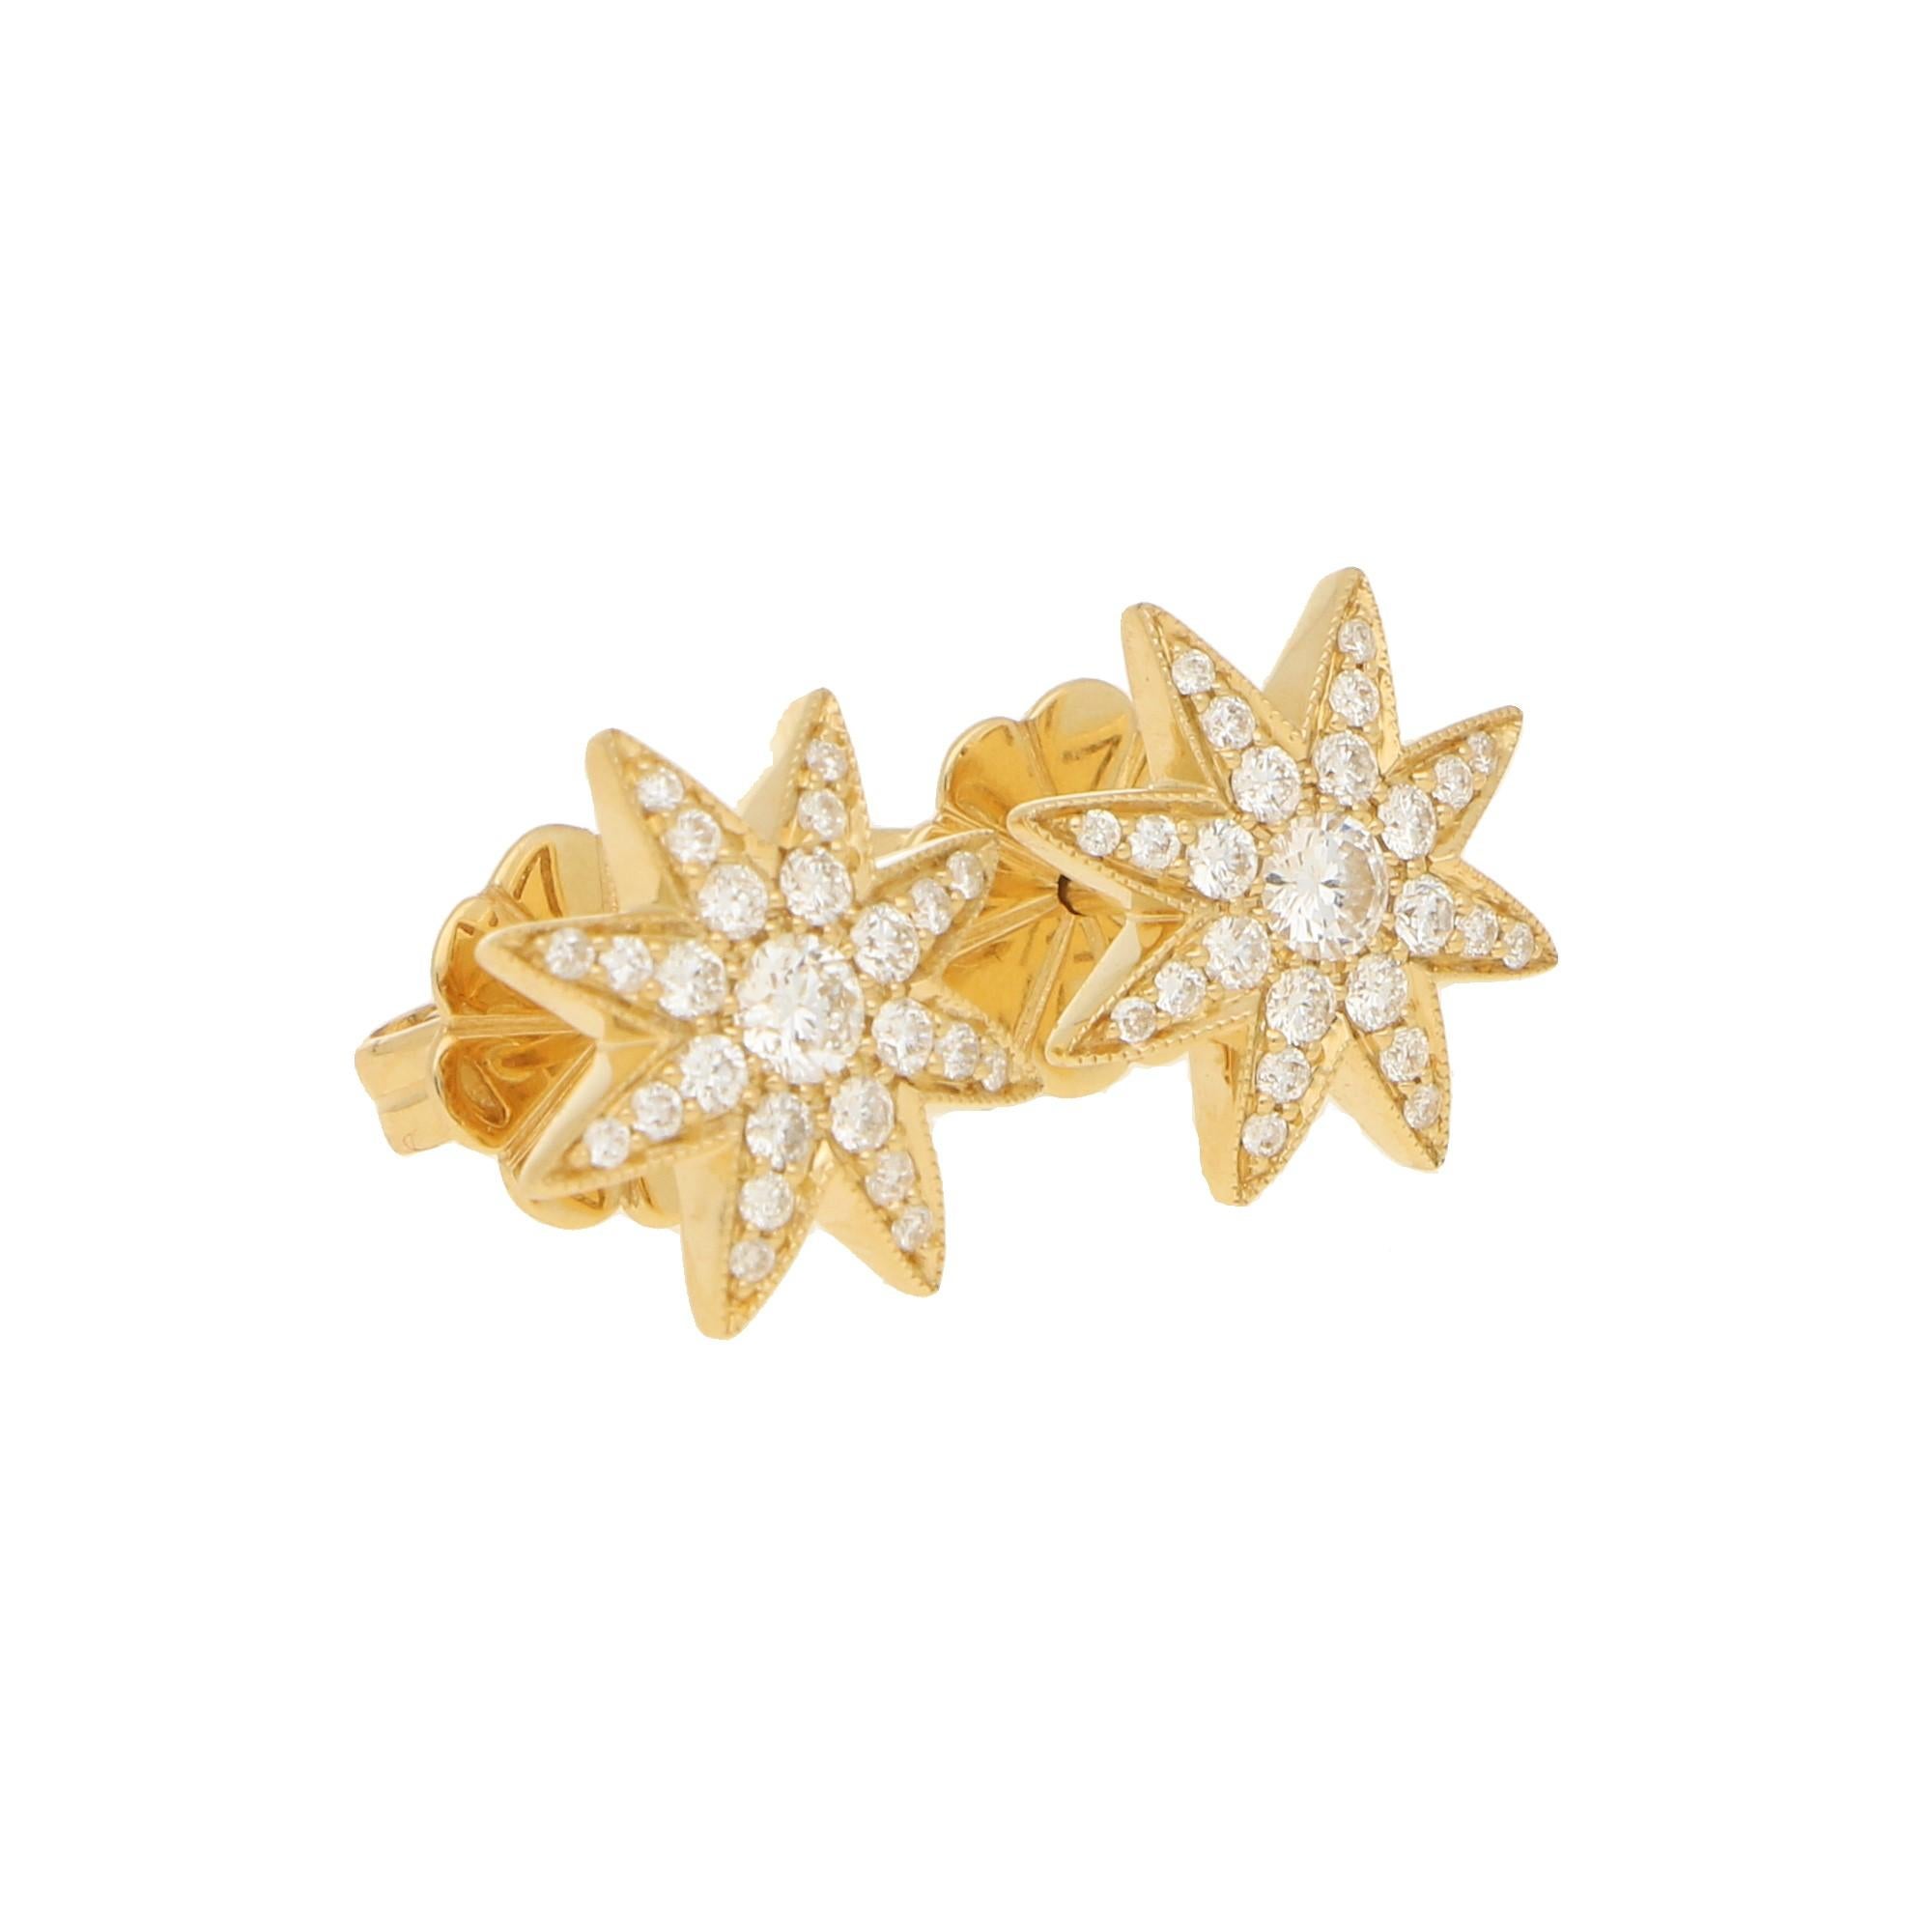 A pretty pair of 18ct yellow gold diamond set star shaped stud earrings. The stars are eight pointed, grain set with twenty five round brilliant cut diamonds of varying sizes, with a mille grain finish around the stars edge. 
Secured on a post with